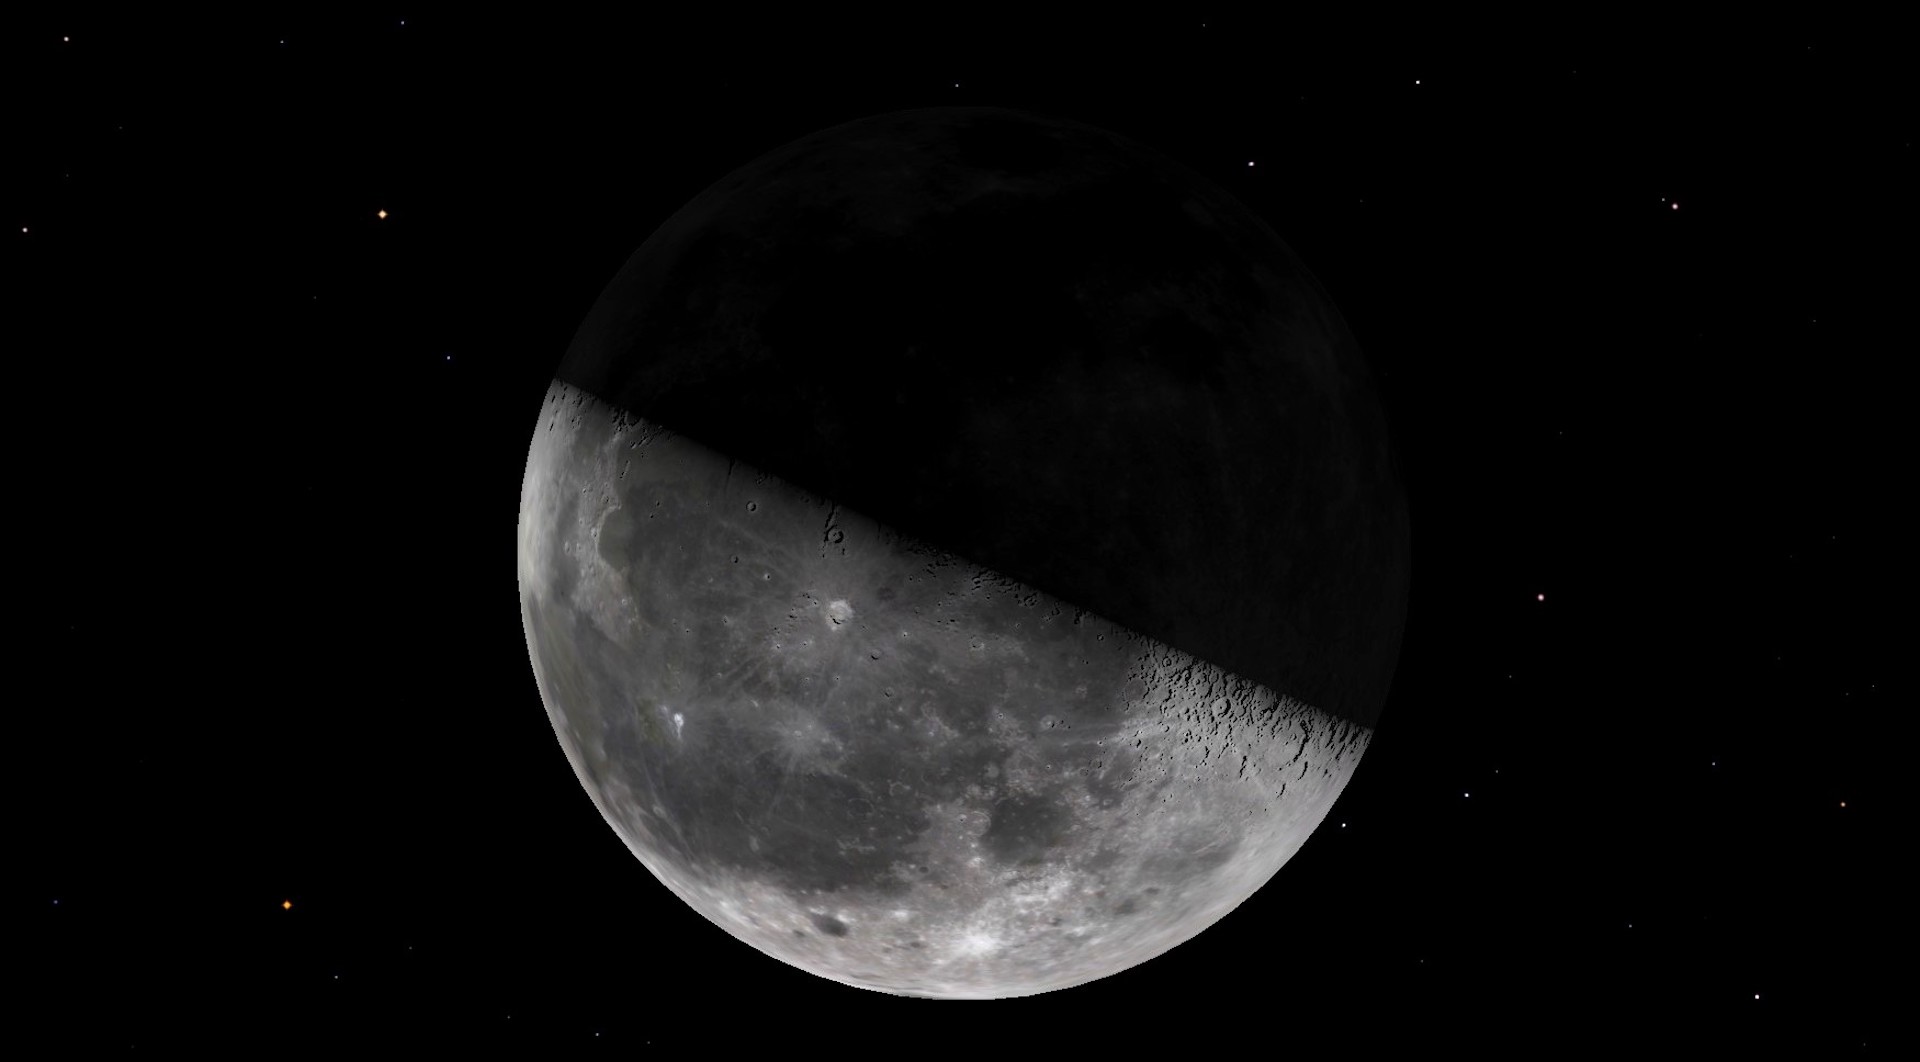 An illustration of the last quarter Moon as seen on the evening of January 14.